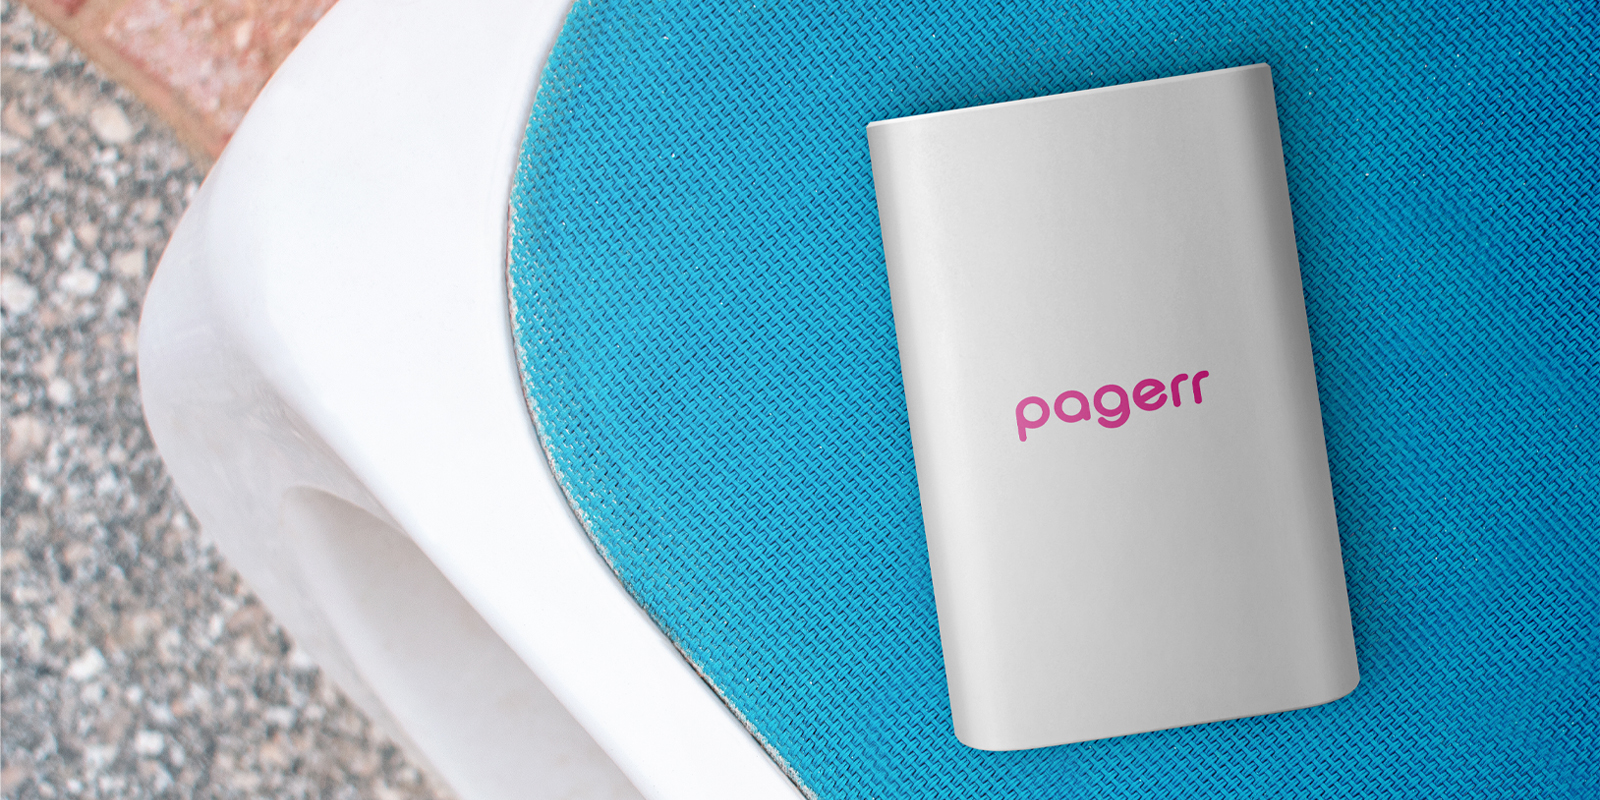 Chargers & power banks in Geelong - Print with Pagerr